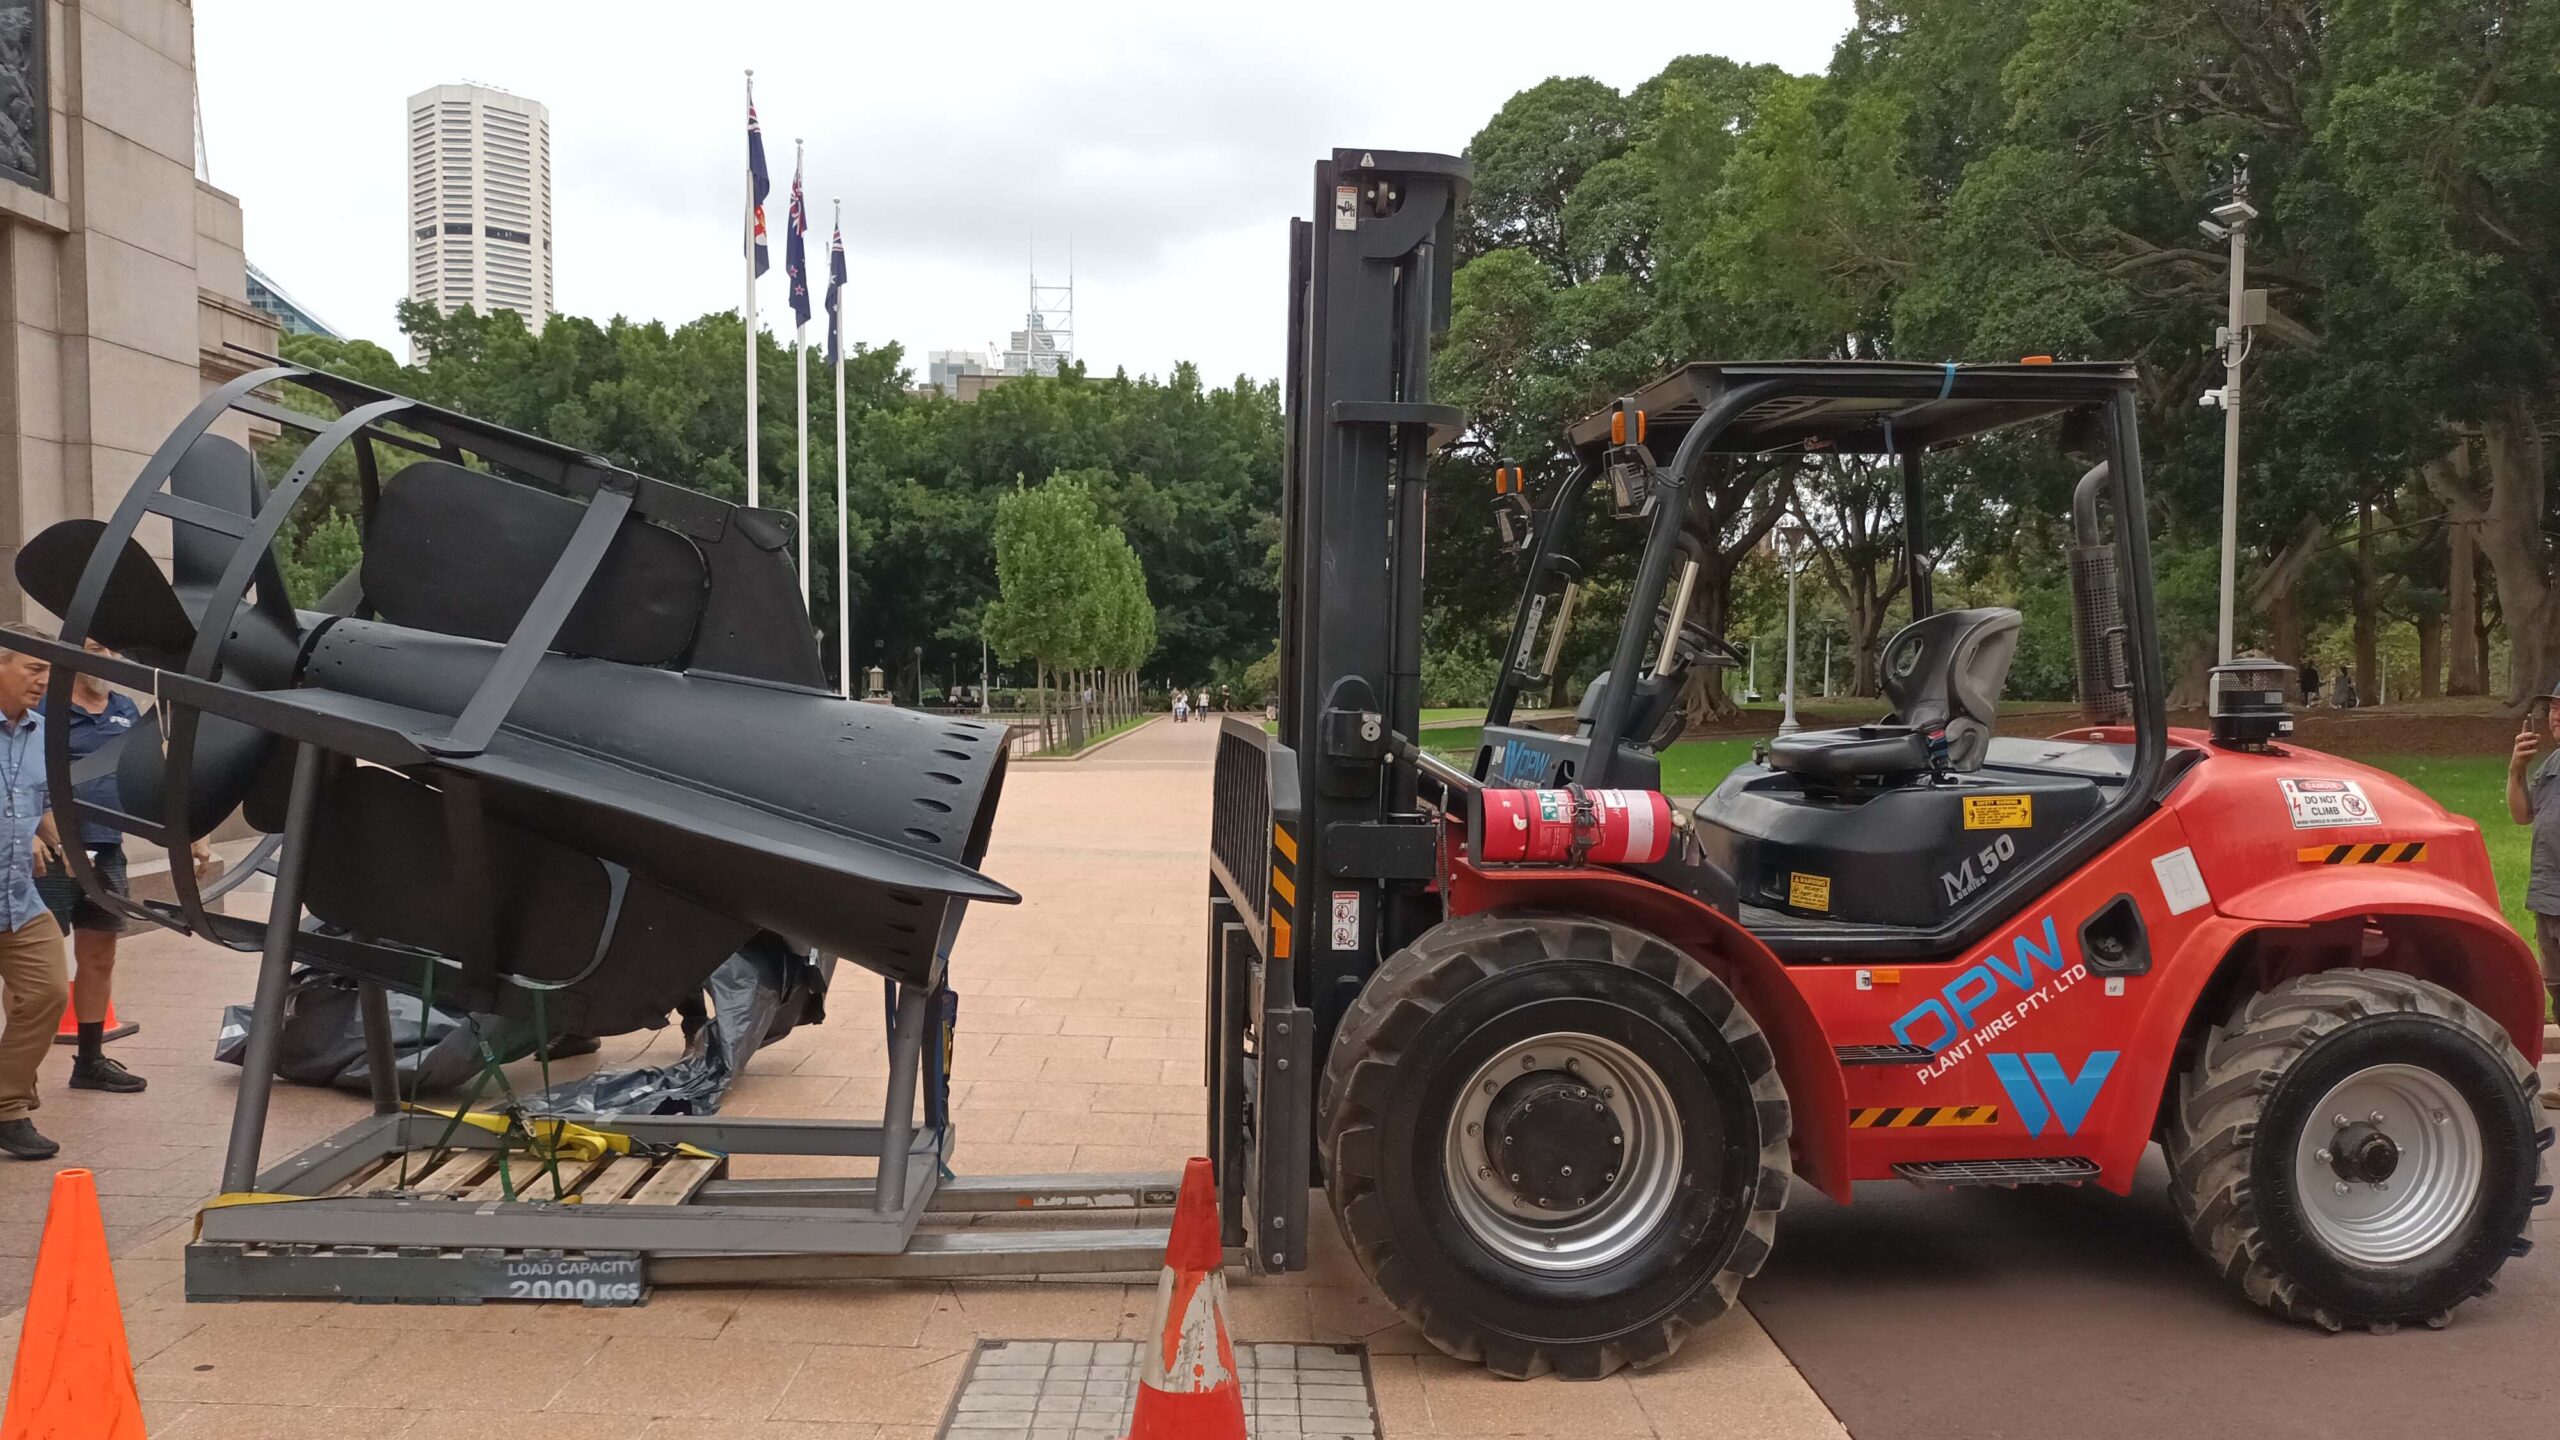 Moving a Japanese Mini-Submarine tail to the Anzac Memorial Hyde Park